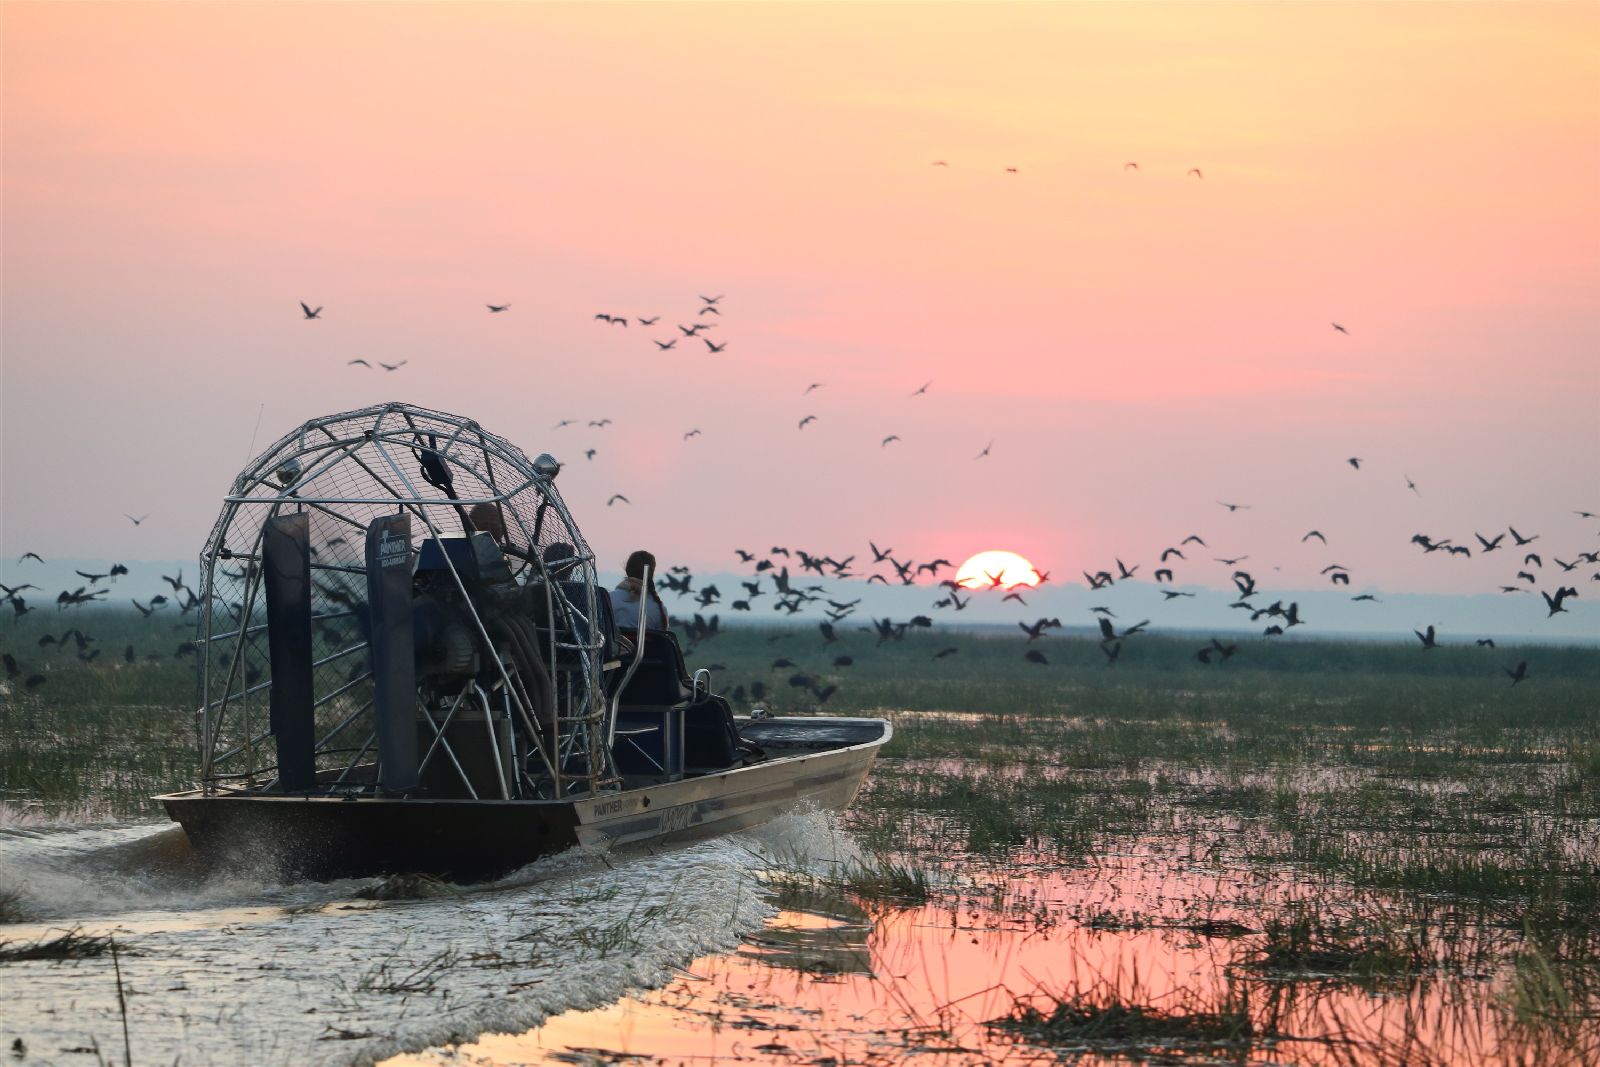 Guests enjoying a hoverboat ride at sunset from Bamurru Plains in Northern Australia